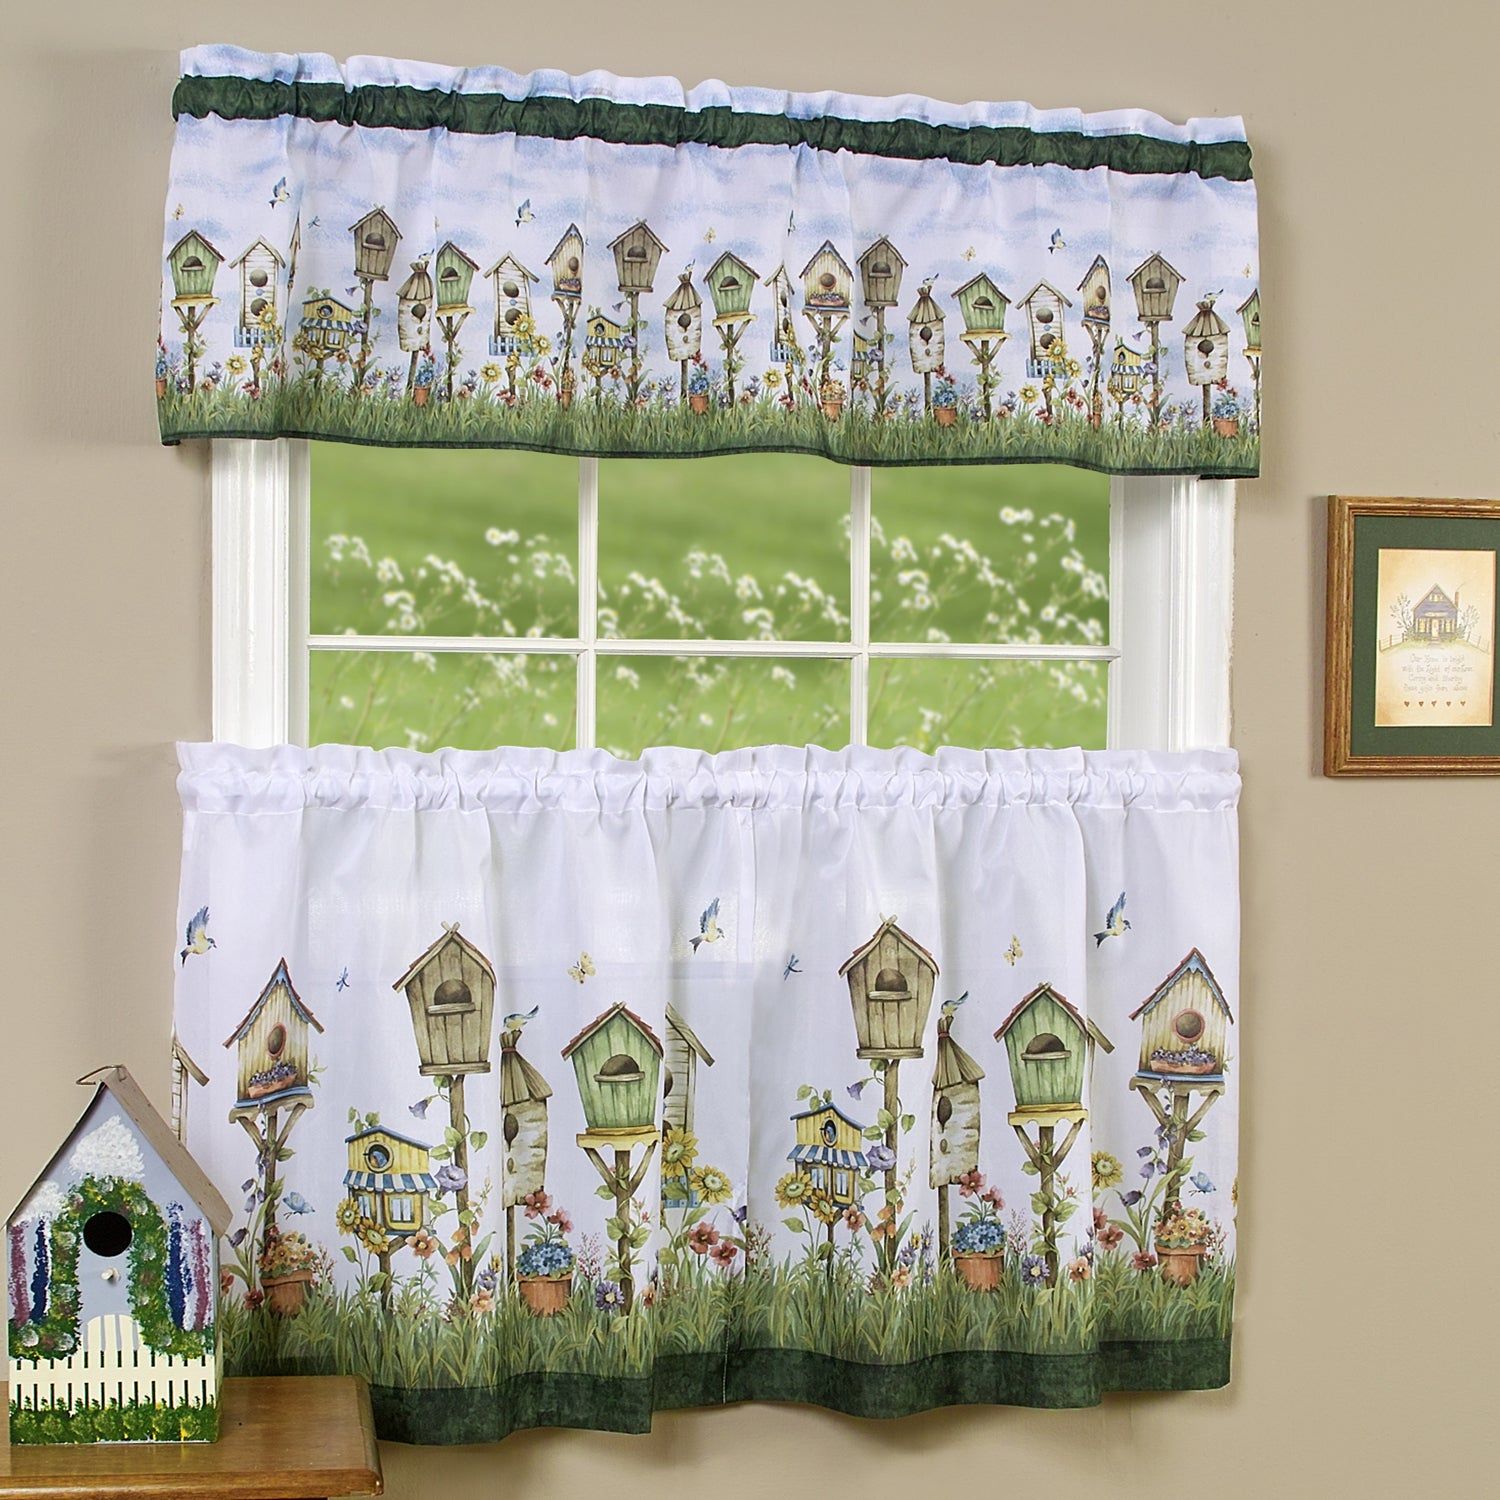 Traditional Two Piece Tailored Tier And Valance Window Curtains Set With  Whimsical Birdhouse Print – 36 Inch For Traditional Tailored Tier And Swag Window Curtains Sets With Ornate Flower Garden Print (View 4 of 20)